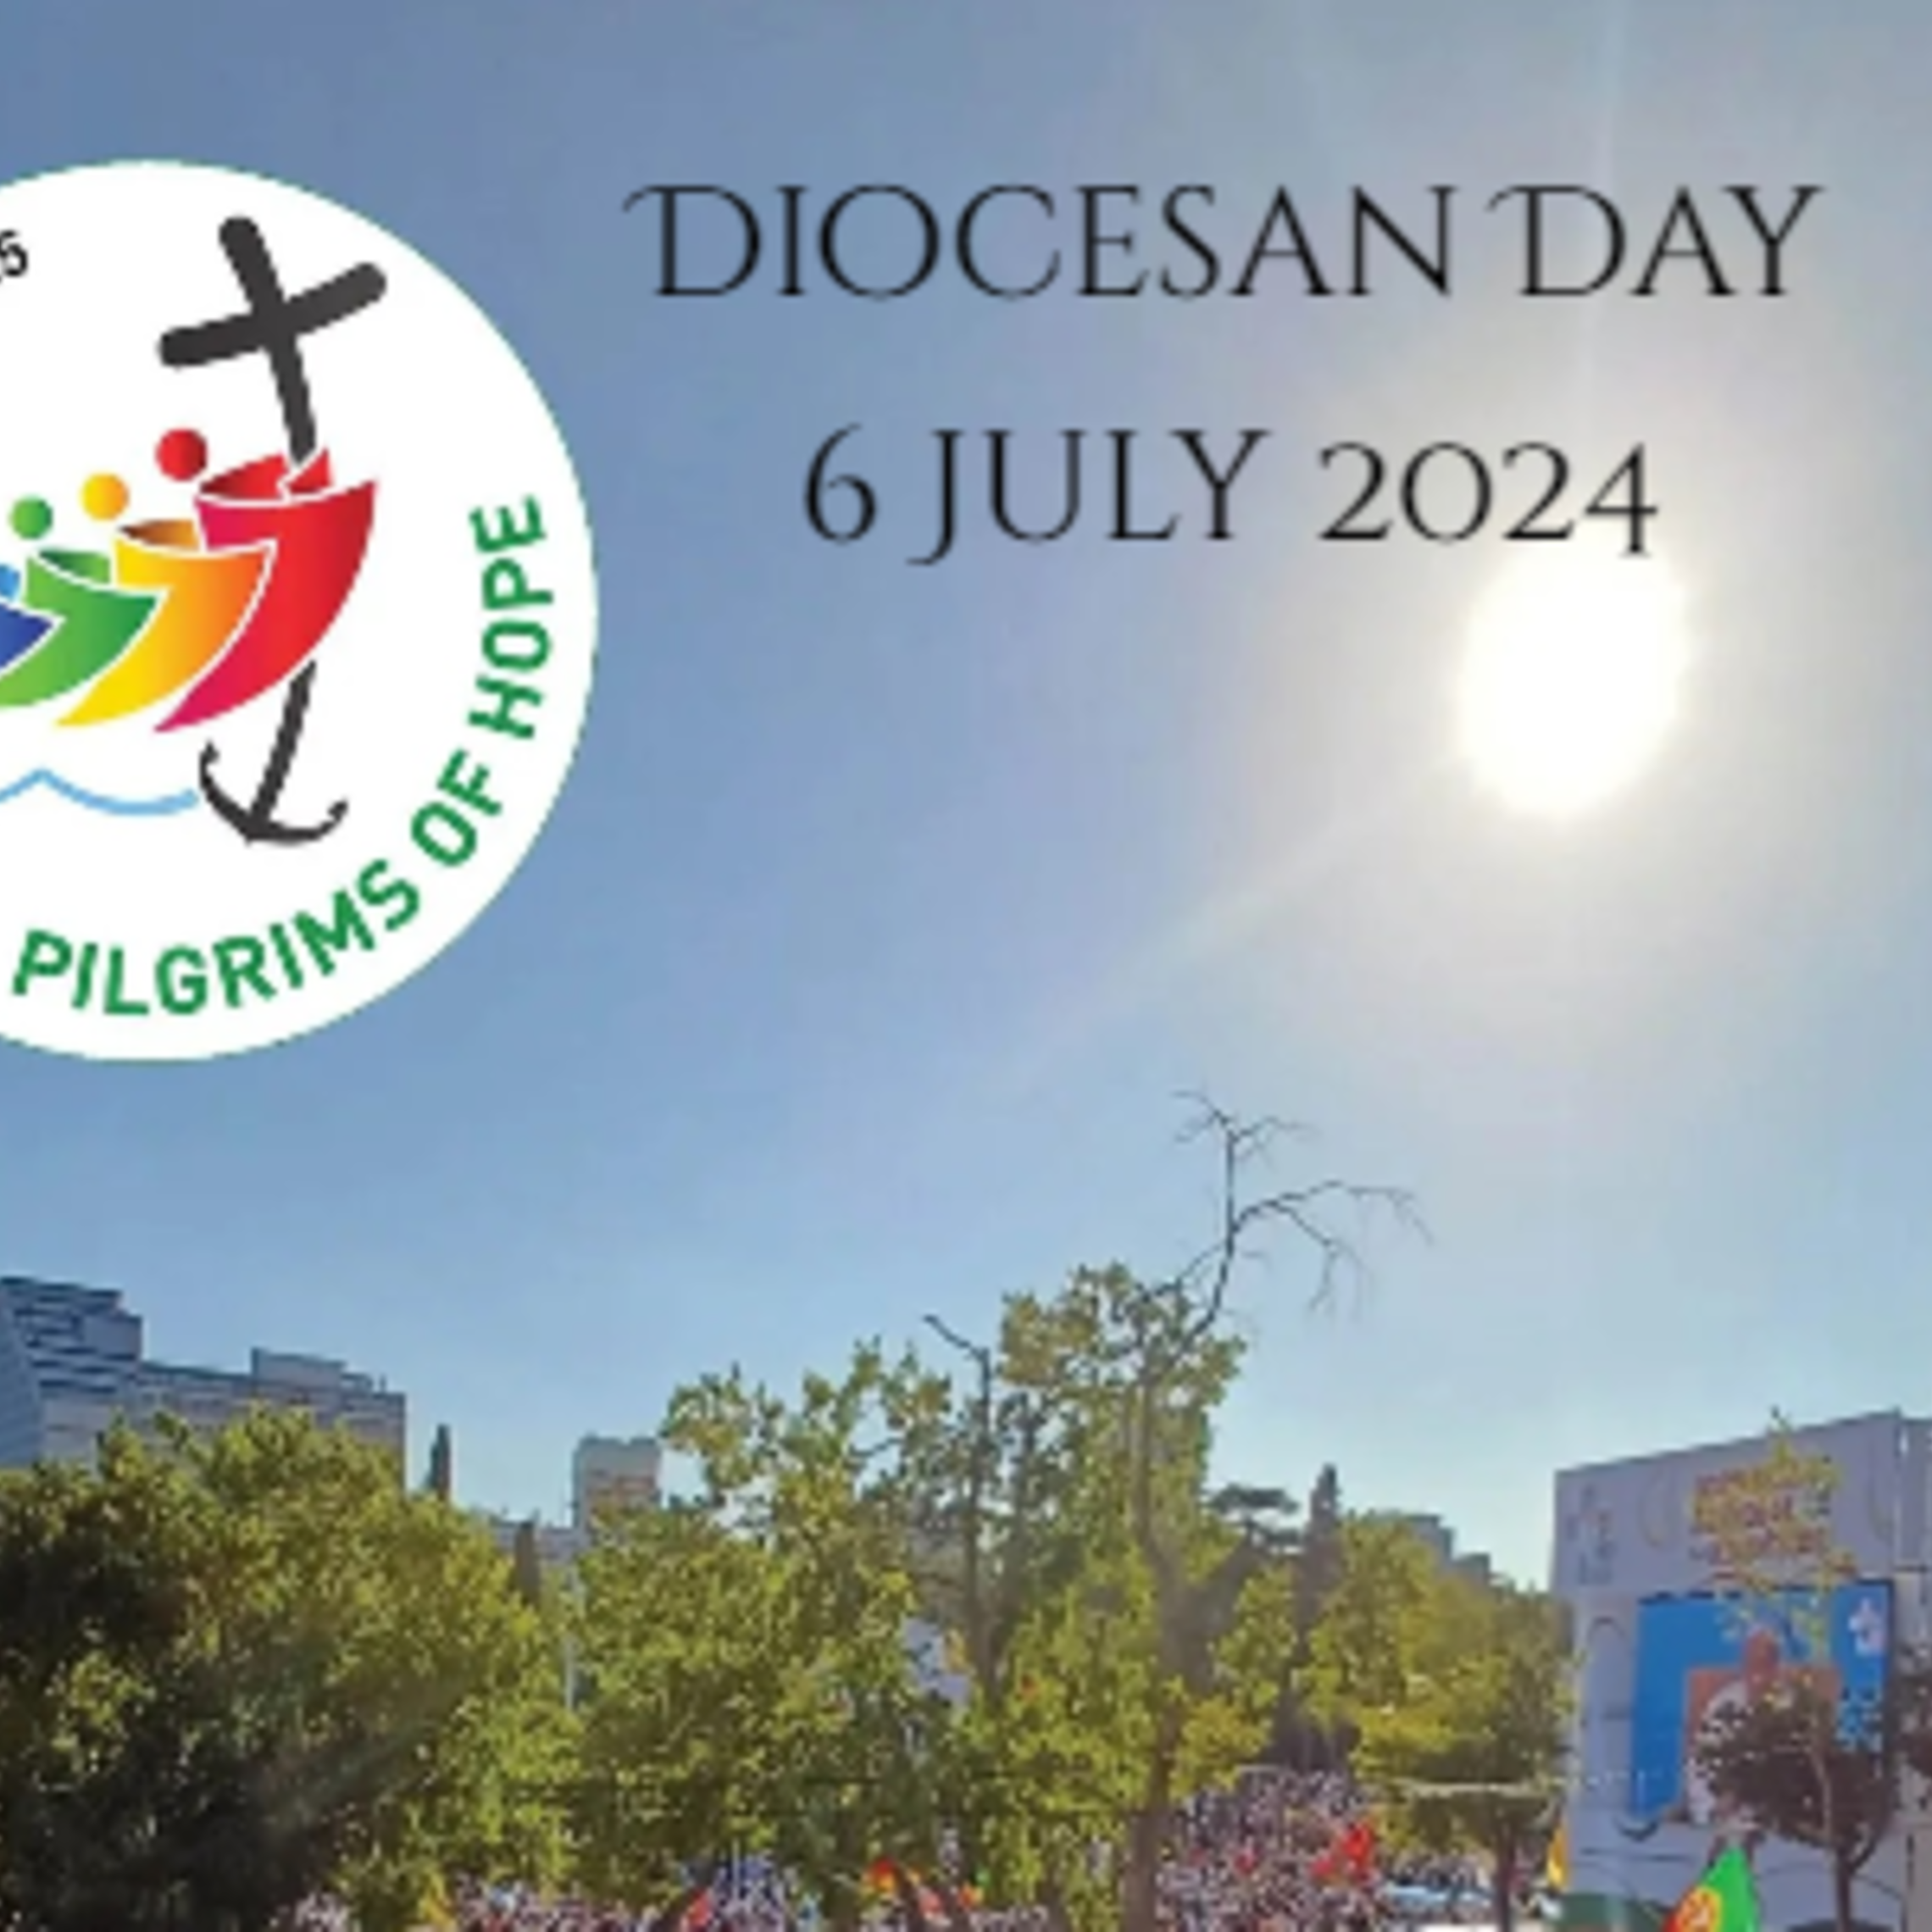 Diocesan Day 06.07 Poster Scaled Fotor 2024060972038